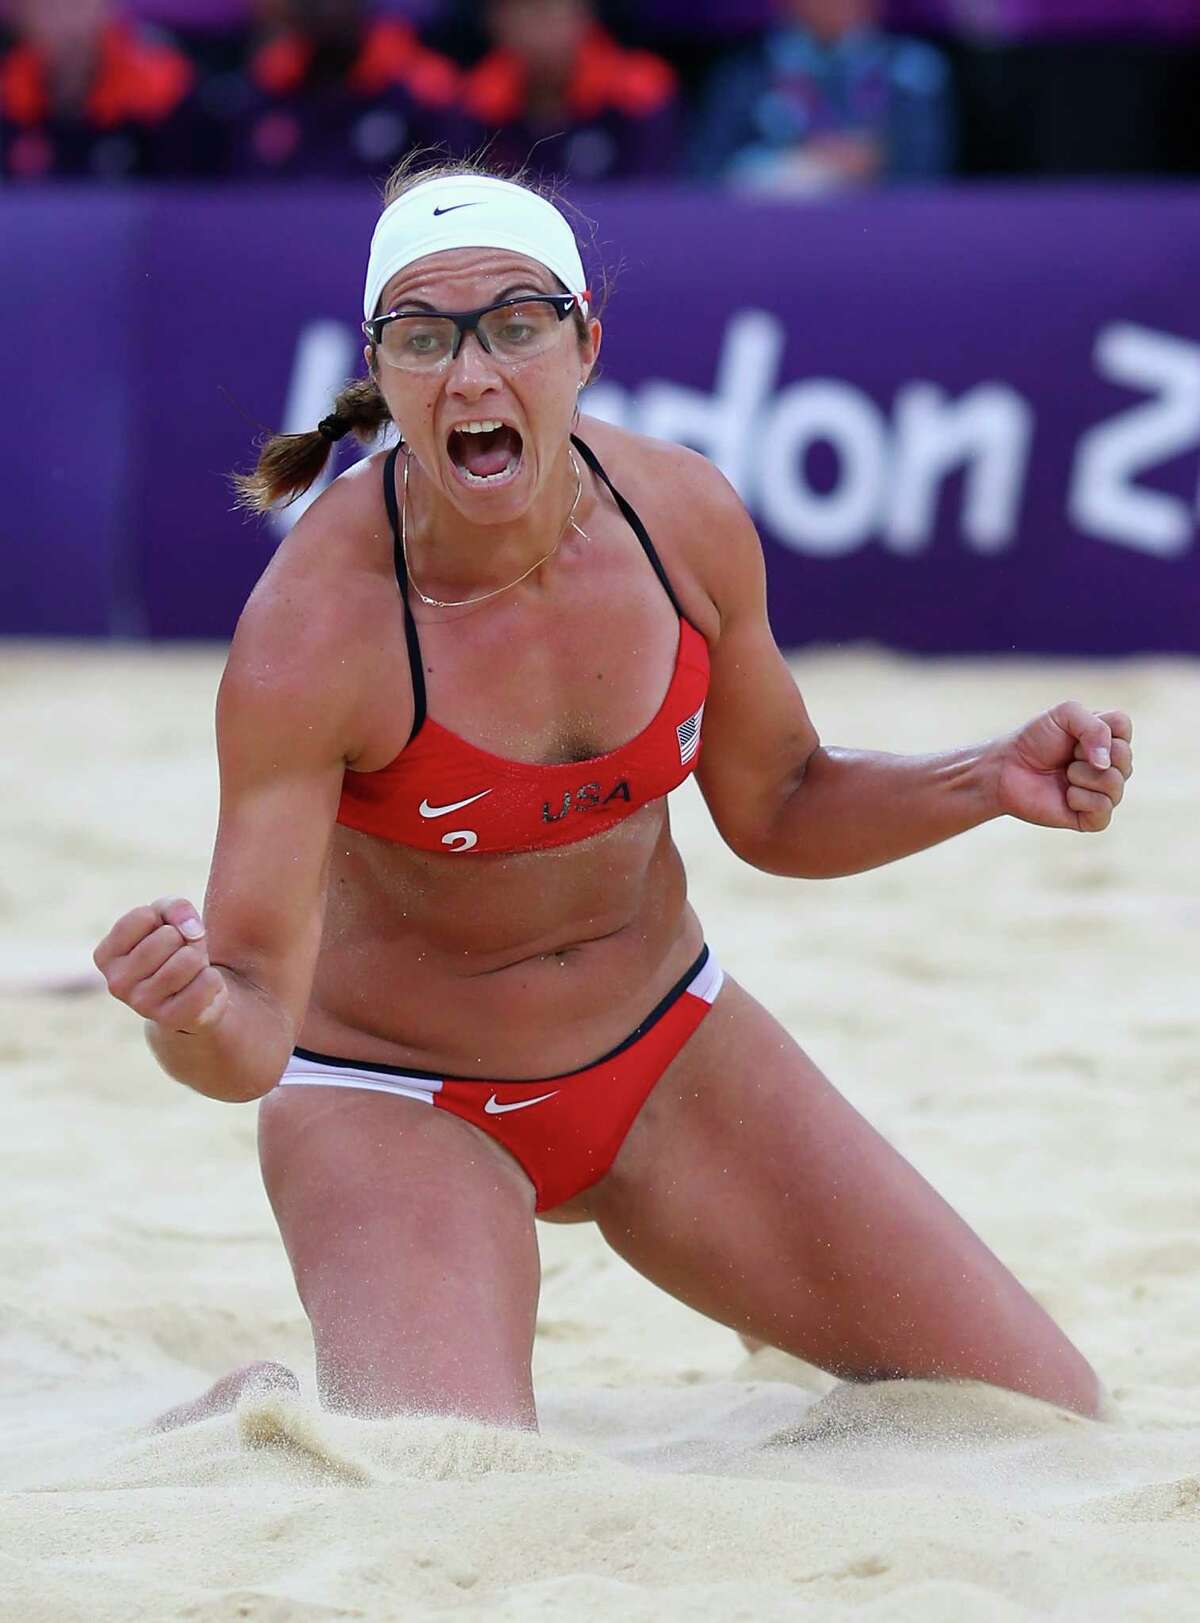 LONDON, ENGLAND - AUGUST 07: Misty May-Treanor of the United States celebrates during the Women's Beach Volleyball Semi Final match between United States and China on Day 11 of the London 2012 Olympic Games at Horse Guards Parade August 7, 2012 in London, England.